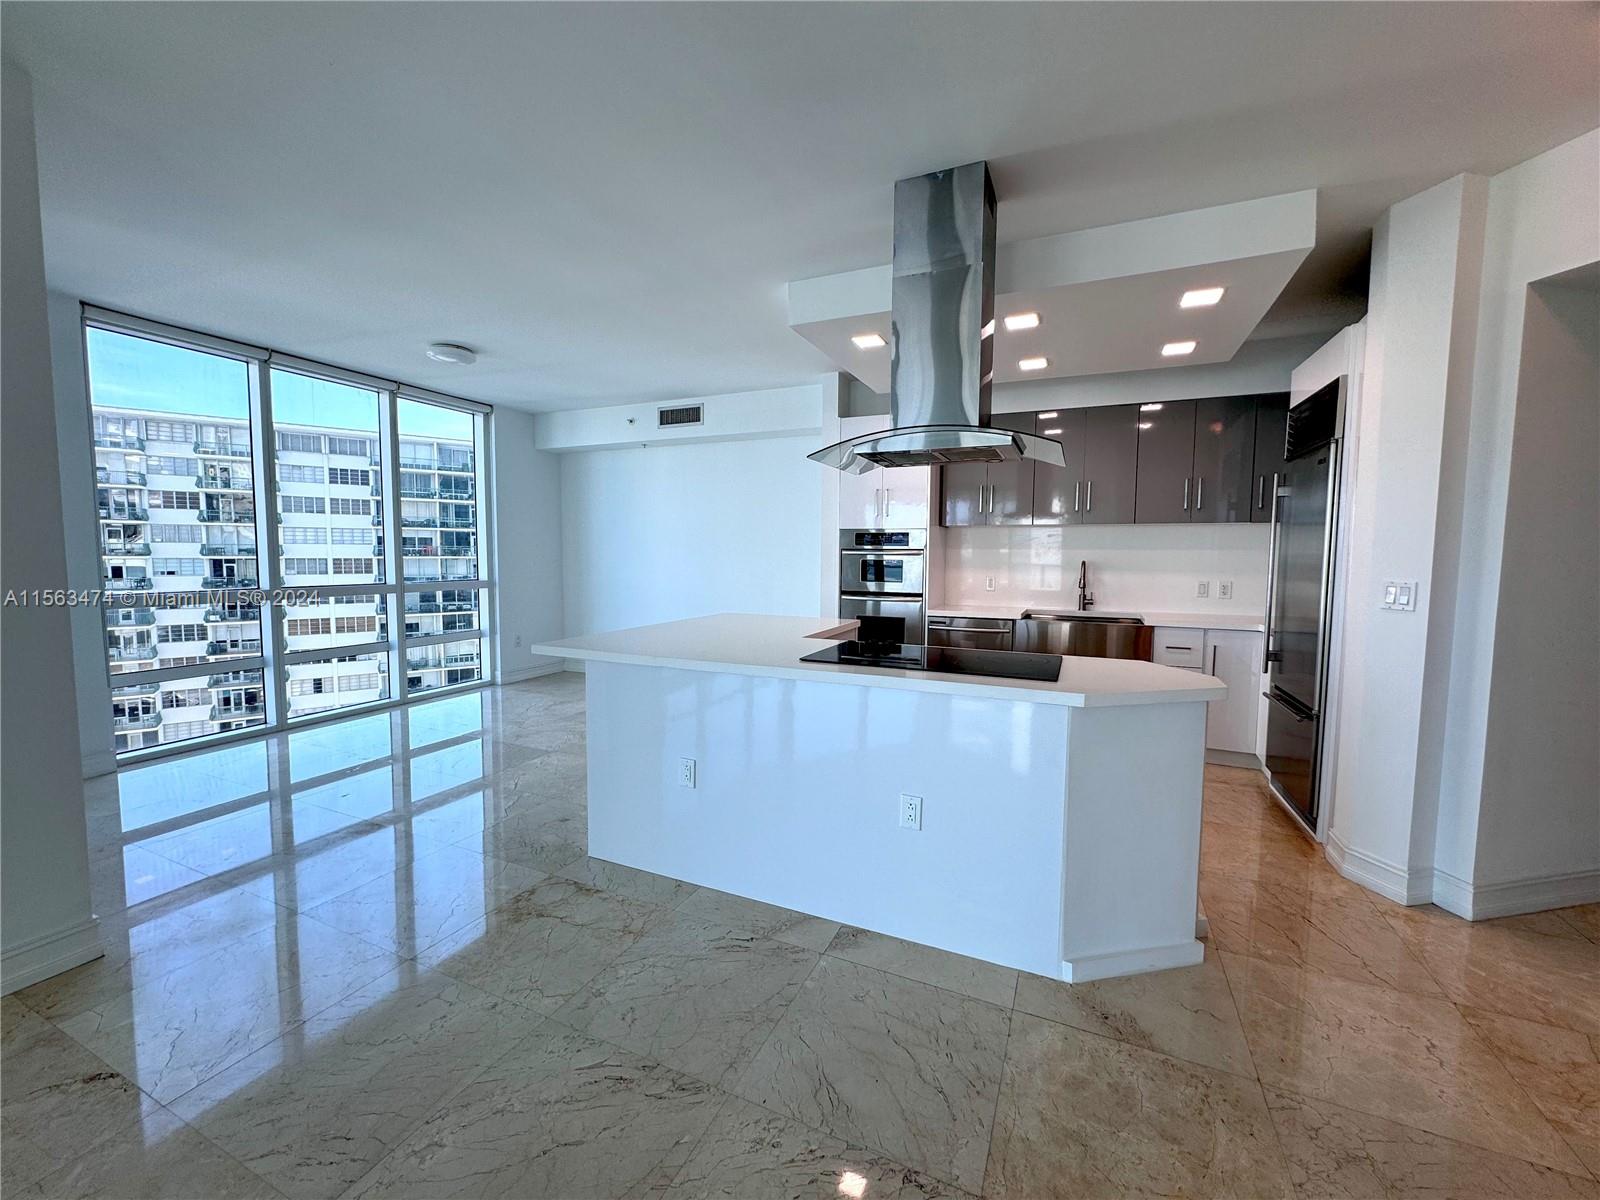 Stunning corner Unit at the EMERALD in the heart of Brickell.Enjoy breathtaking bay and city views including Spacious layout. this luxurious apartment has 2 bedrooms and 2.5 baths with a brand new kitchen complete with SS appliances.Beautiful Marble floors . Oversized terrace overlooking the bay.
Amenities including rooftop pool fitness center, community room bike room concierge service . steps from dinning, shopping and entertainment.